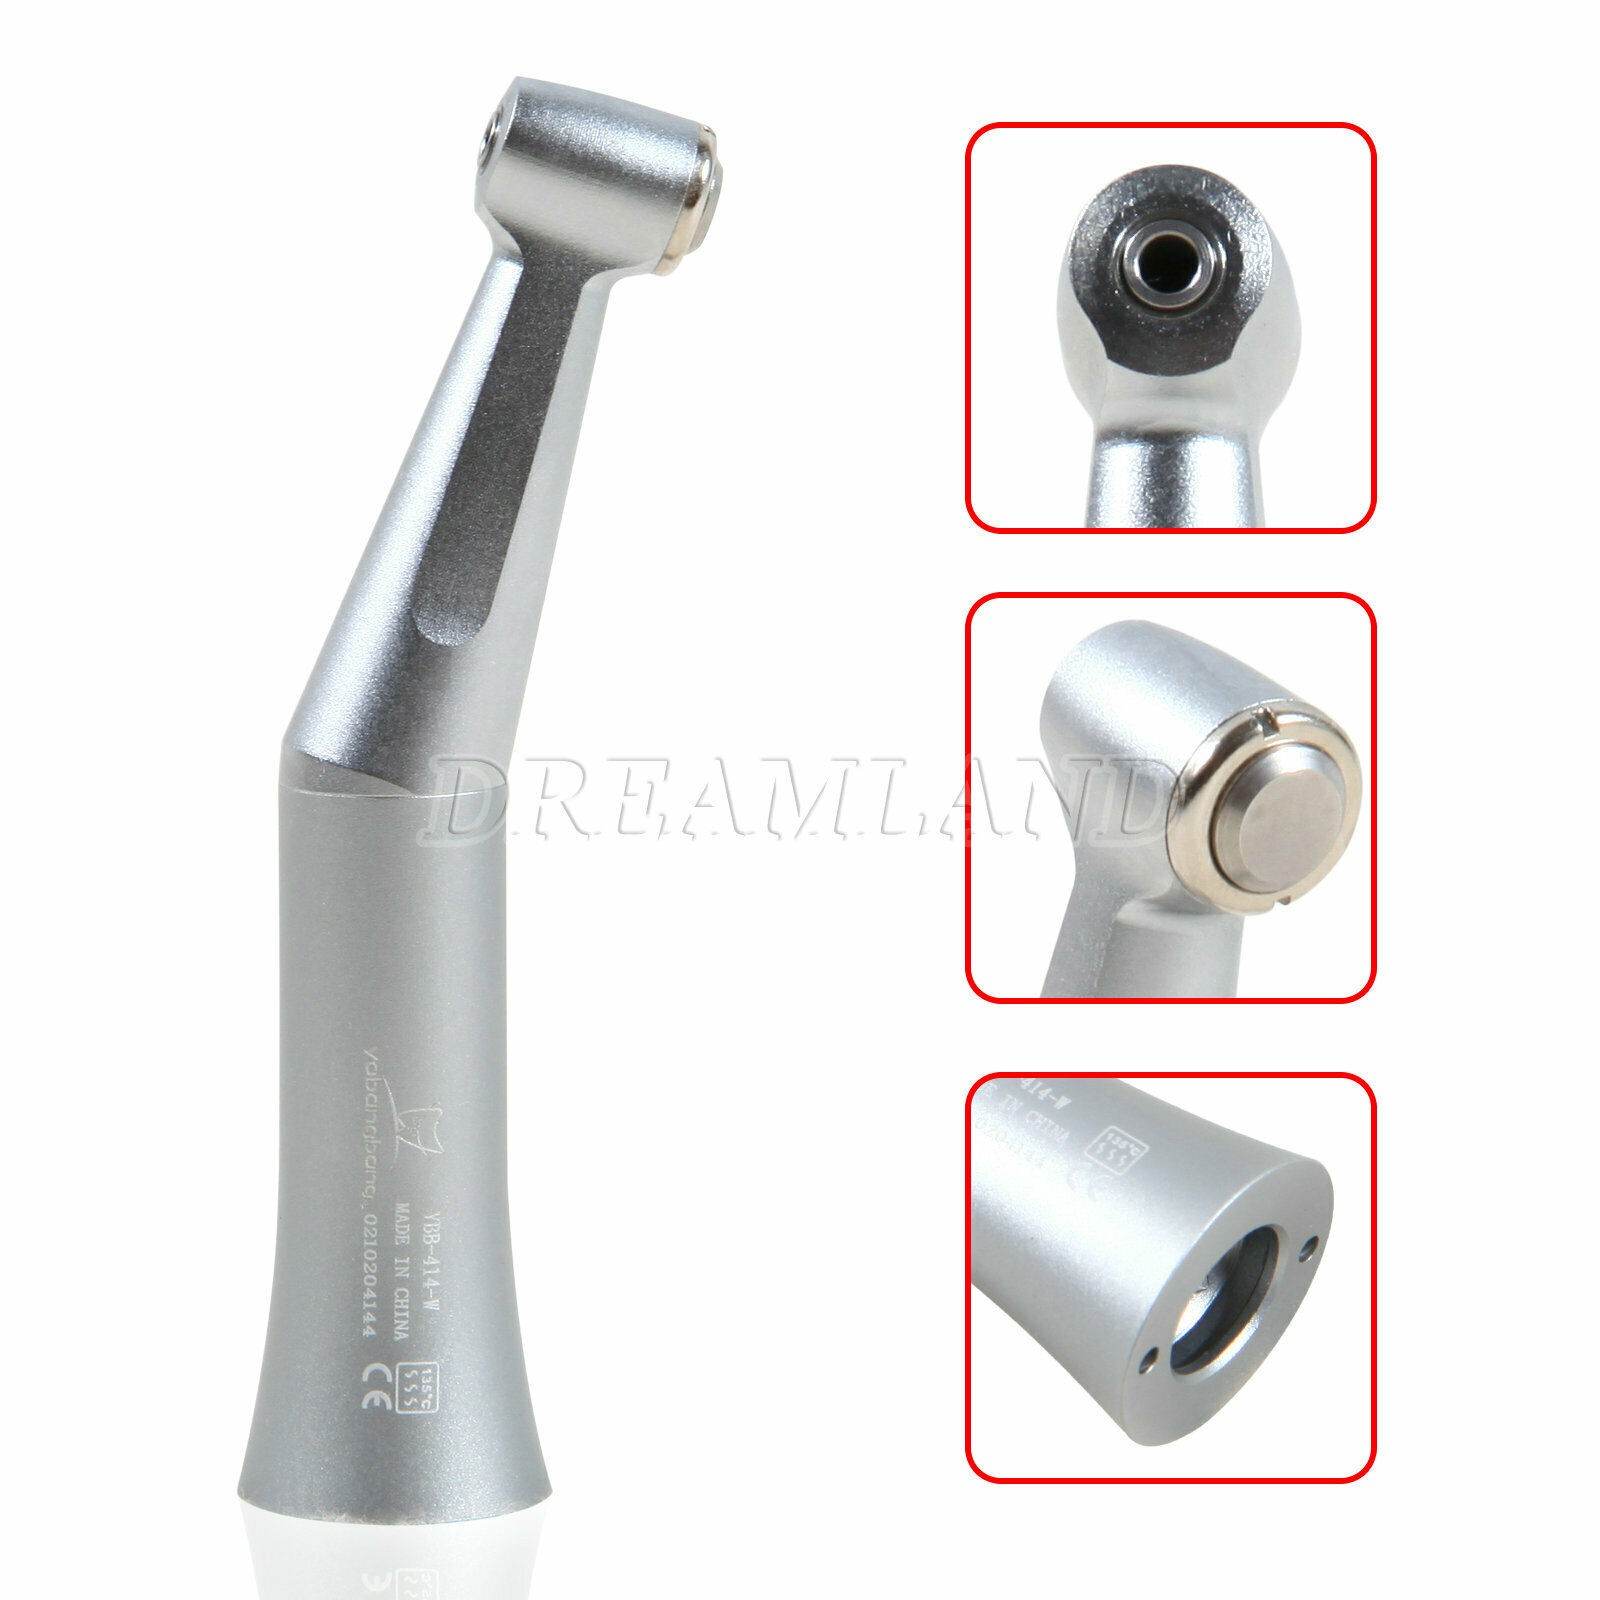 NSK Dental Style Low Speed ​​Push Button Chuck Stainless Steel Contra Angle Handpiece FX23